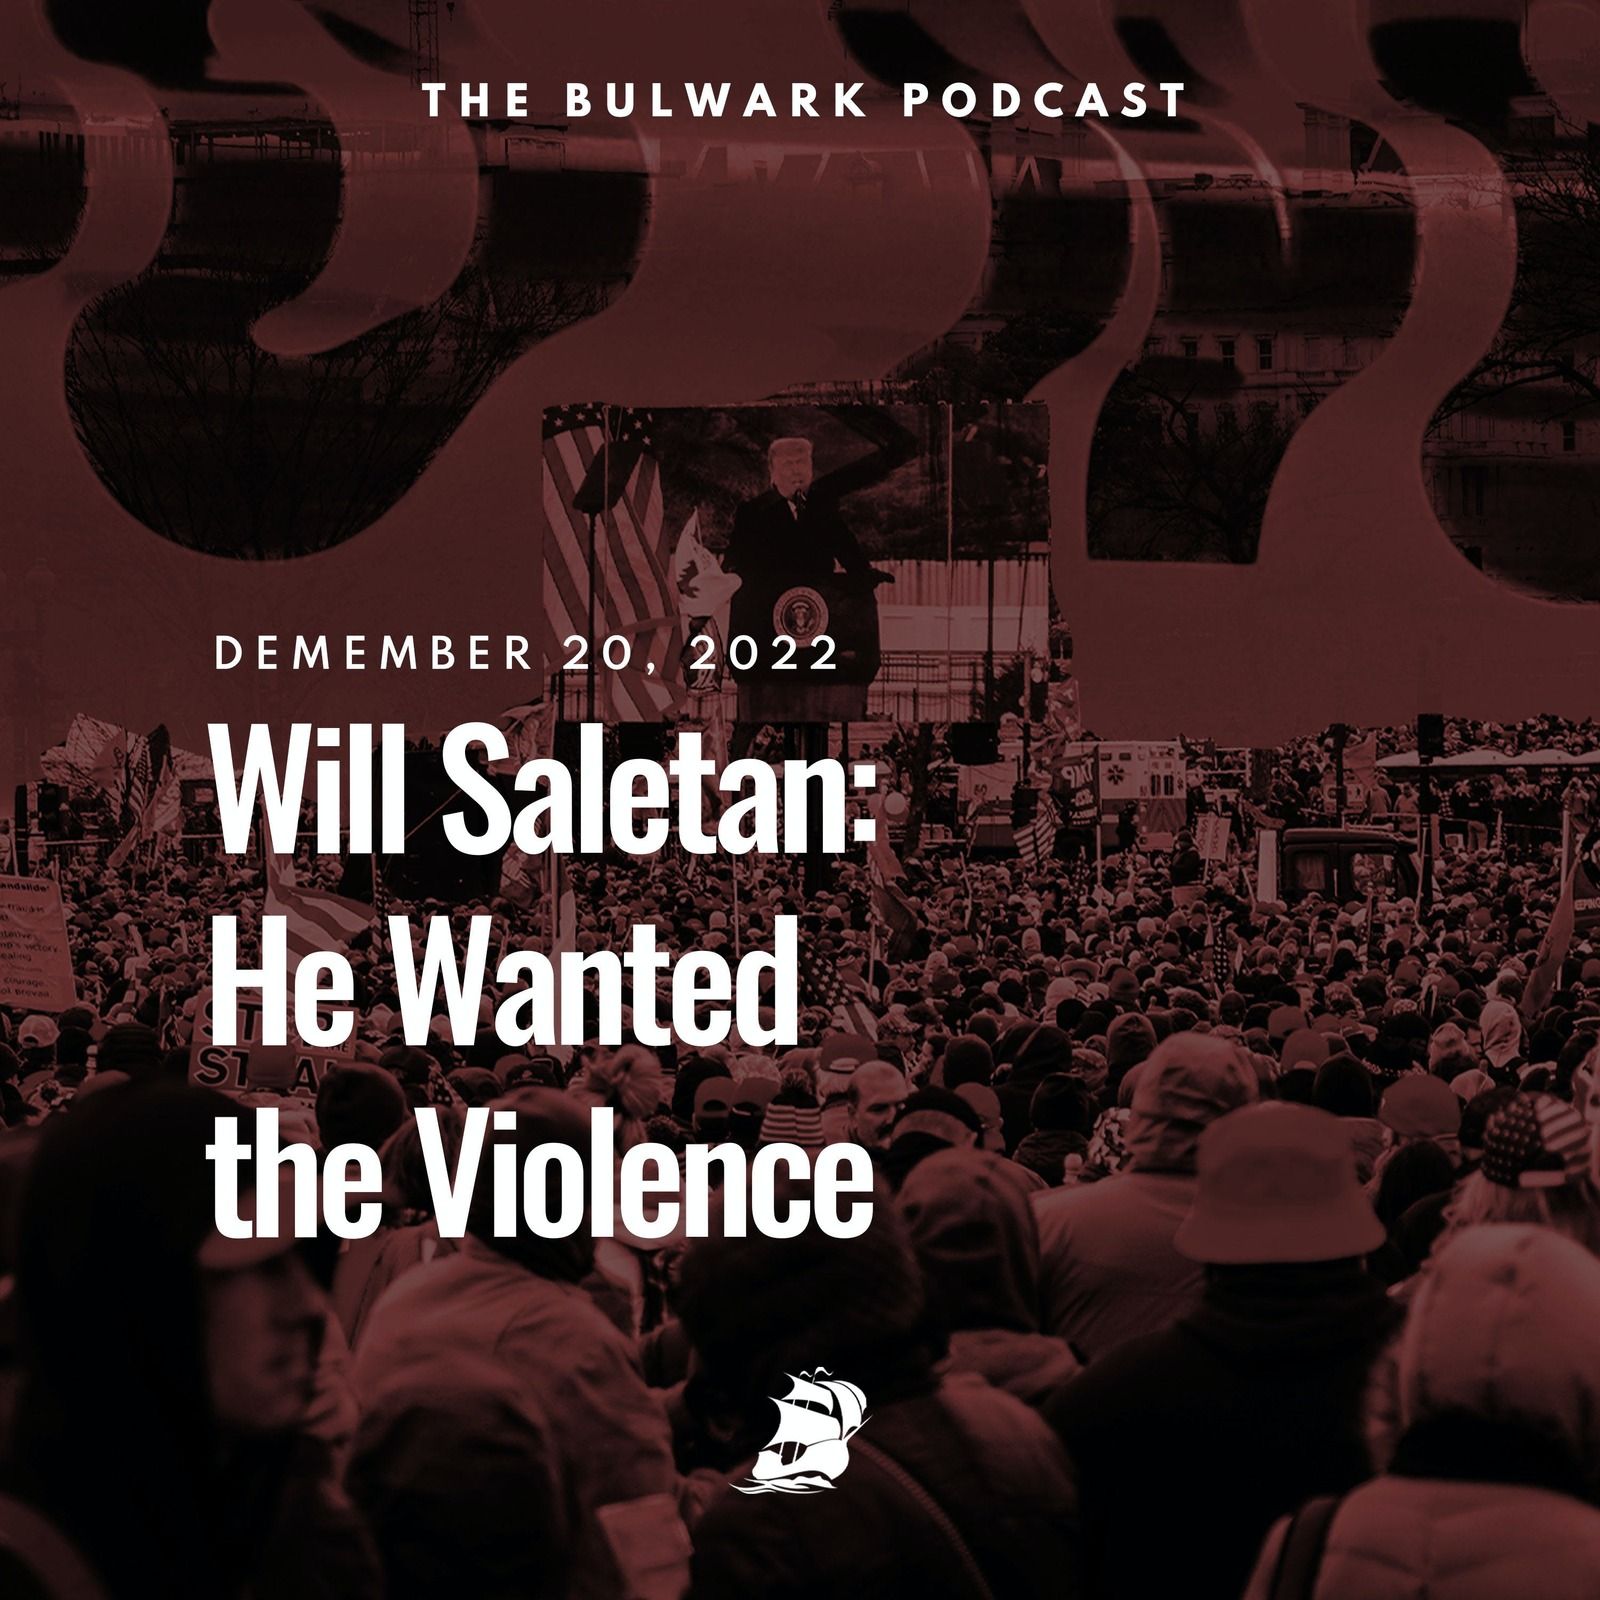 Will Saletan: He Wanted the Violence by The Bulwark Podcast